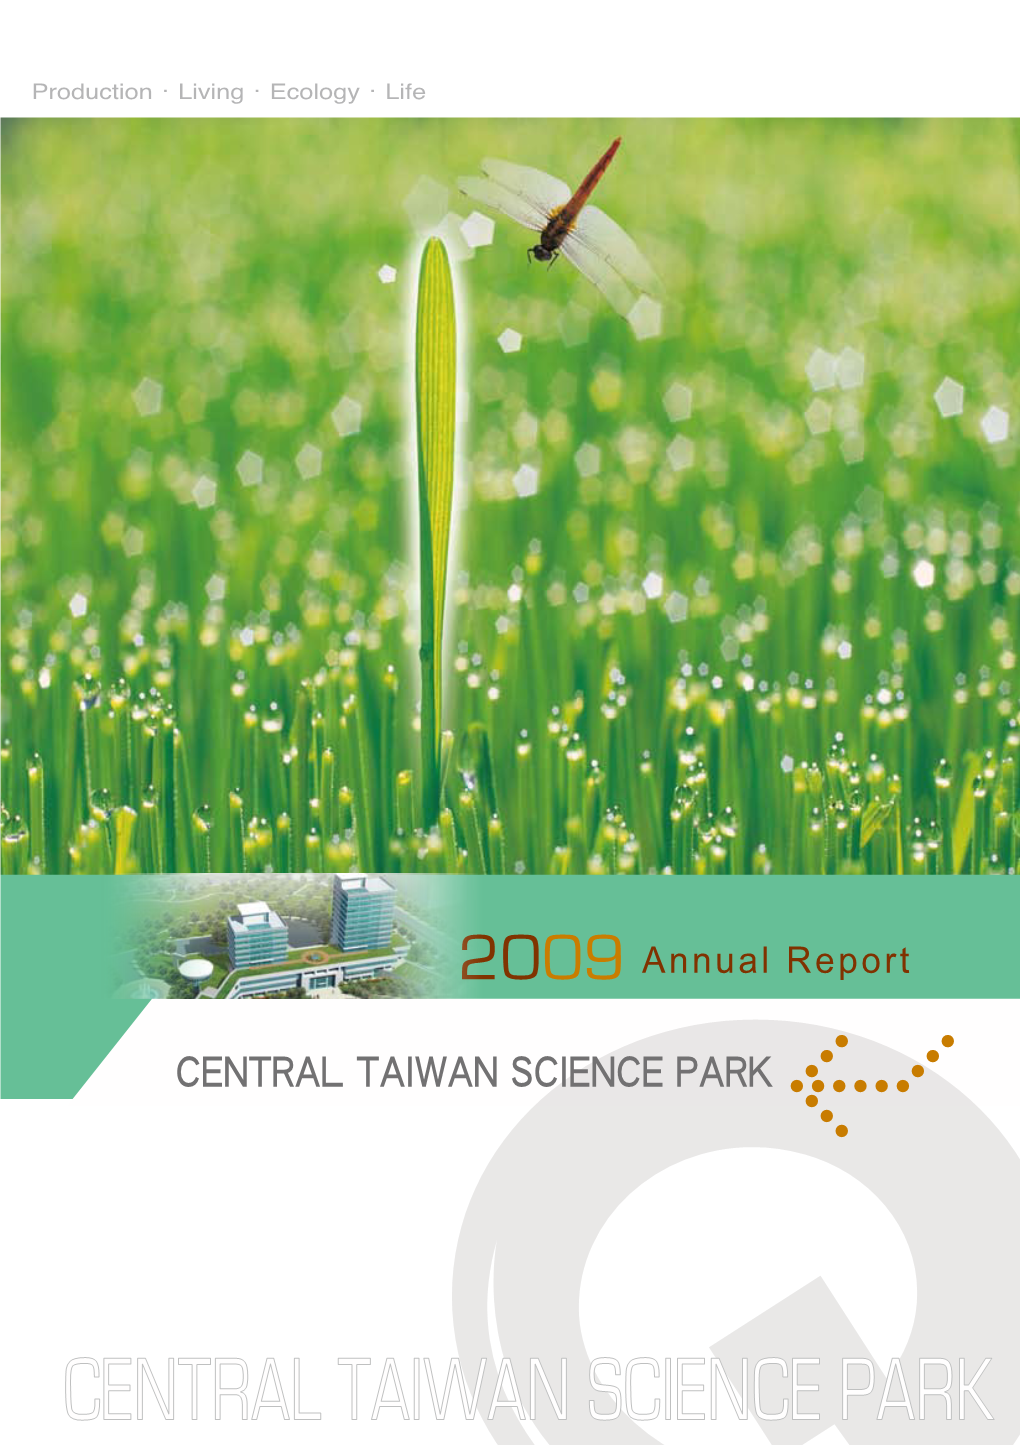 Central Taiwan Science Park